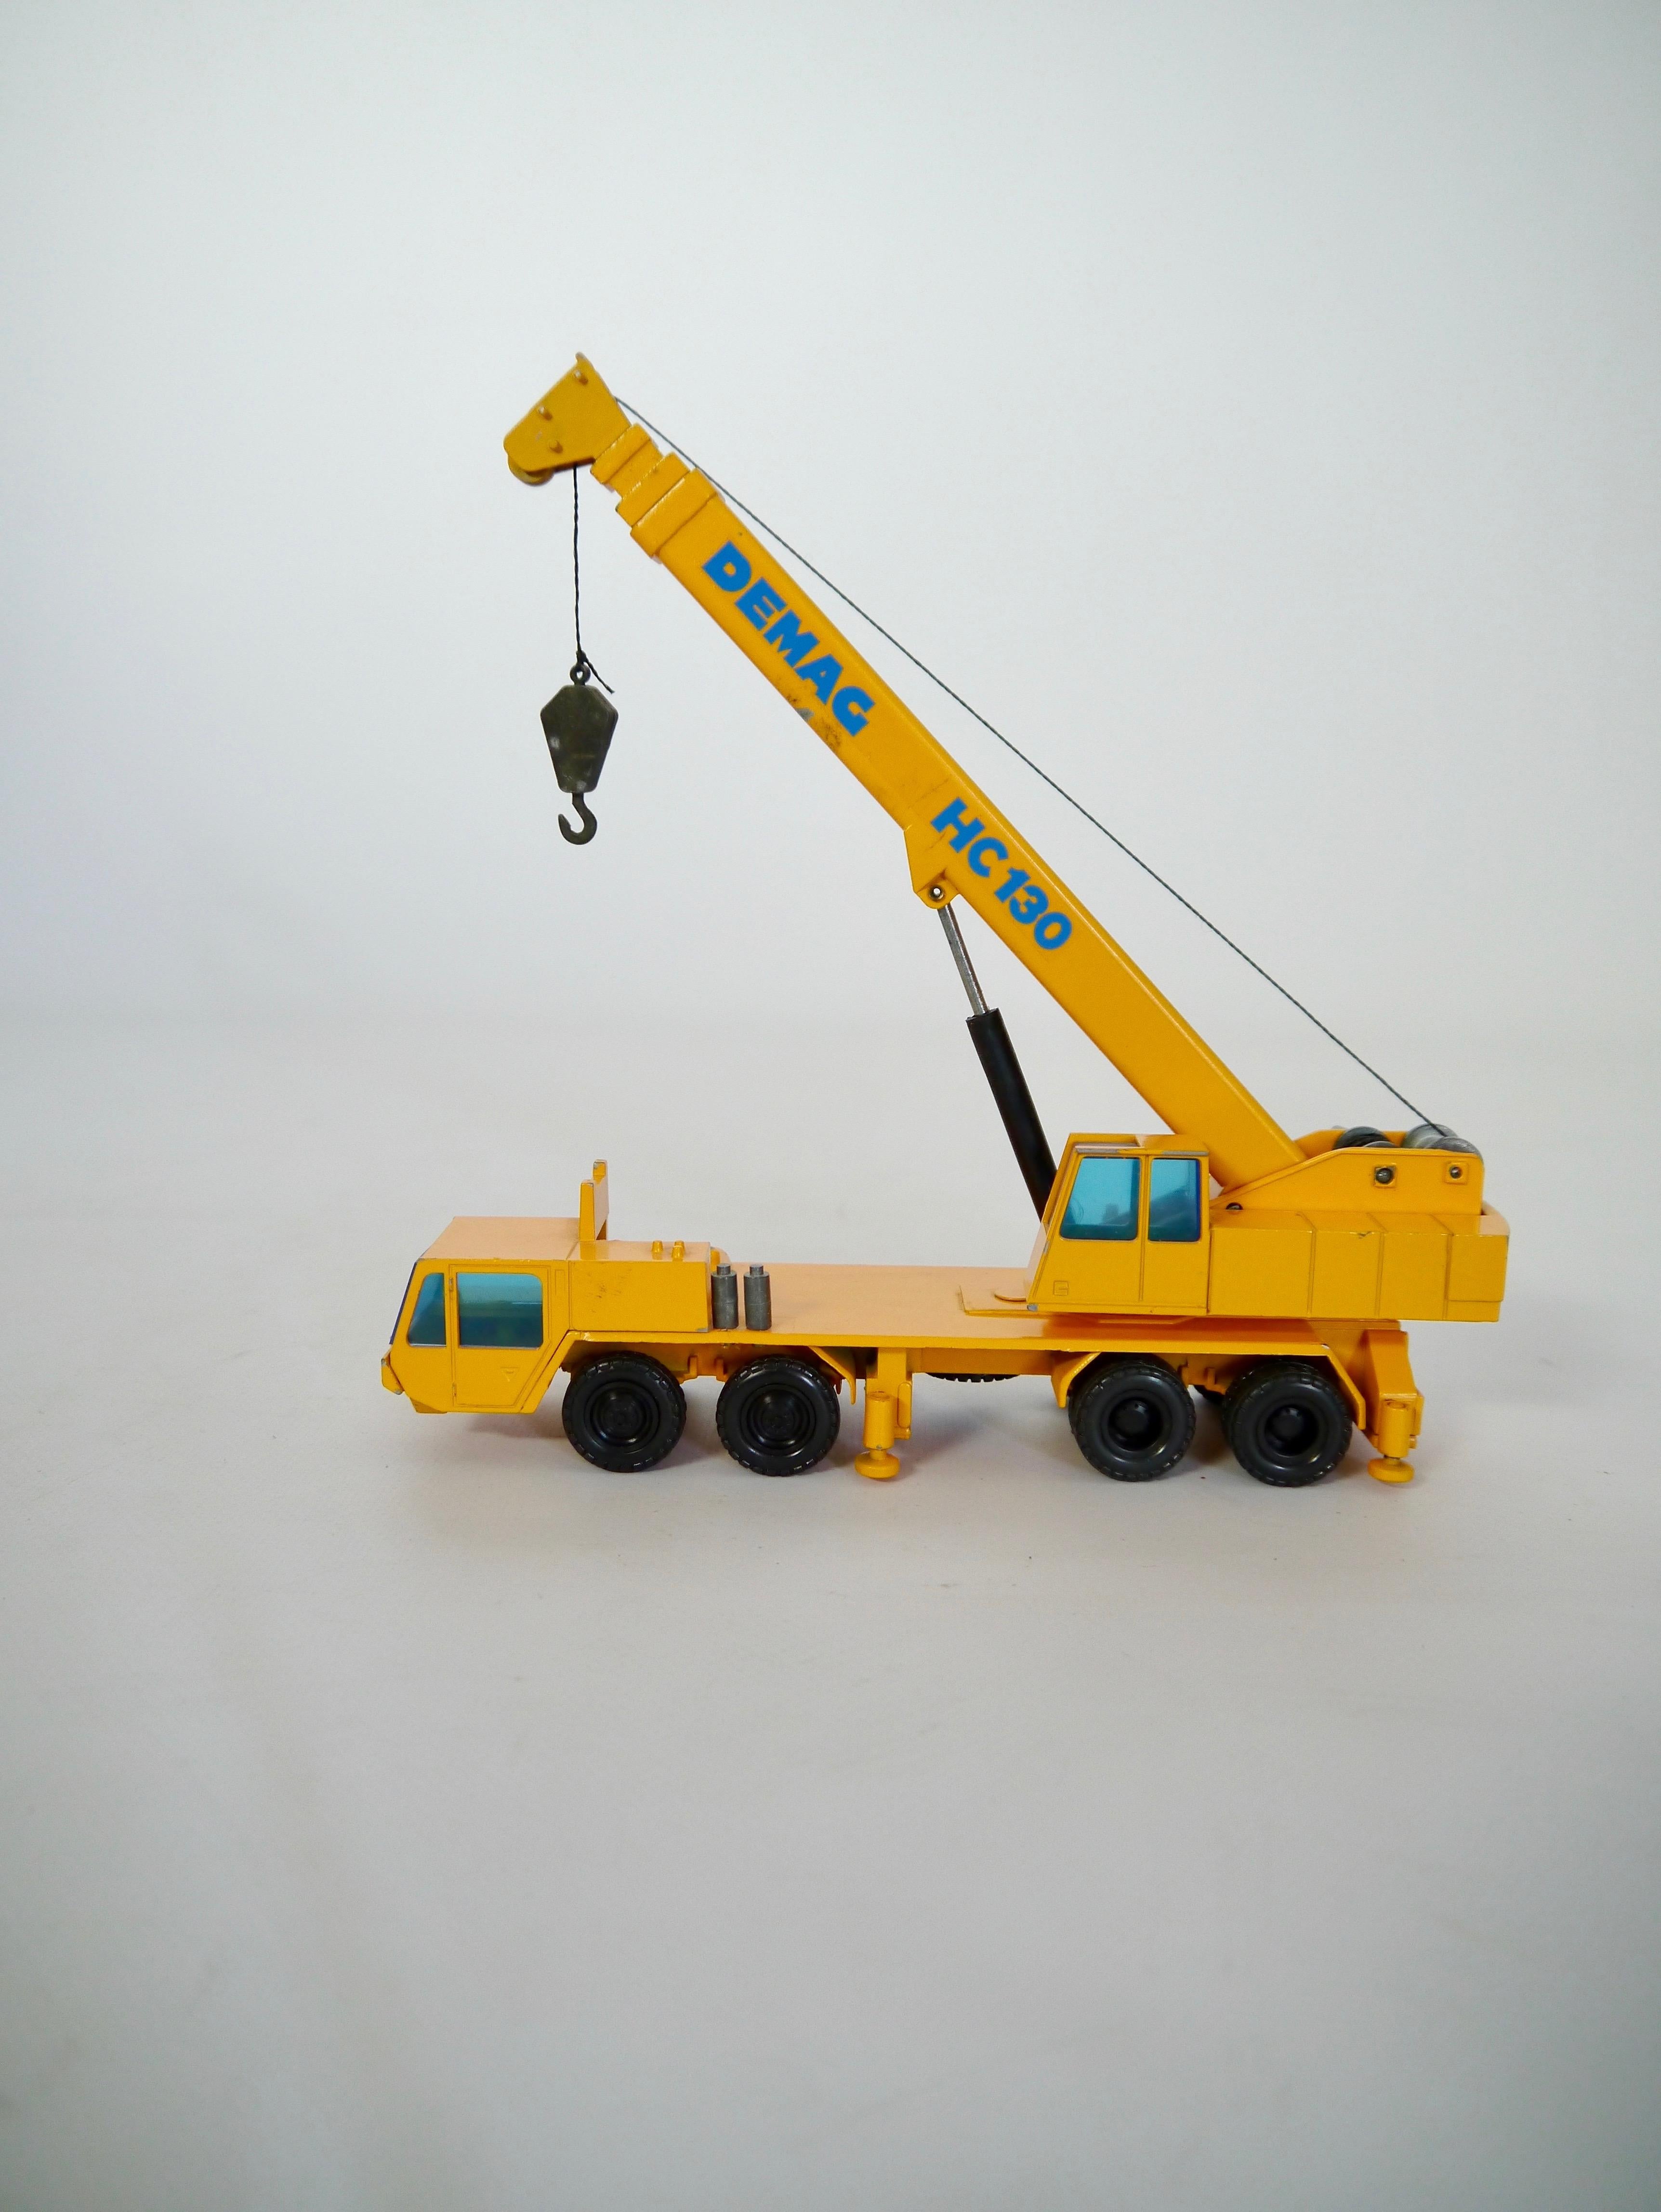 Die cast DEMAG HC130 crane truck fabricated by Nürnberger Zinkdruckguß-Modelle GmbH (NZG), West Germany 1970s. NZG is famous for specializing in collectible high quality toys and promotional models. Scale 1:50, model no 240. Weight 750gr = 26.5oz.